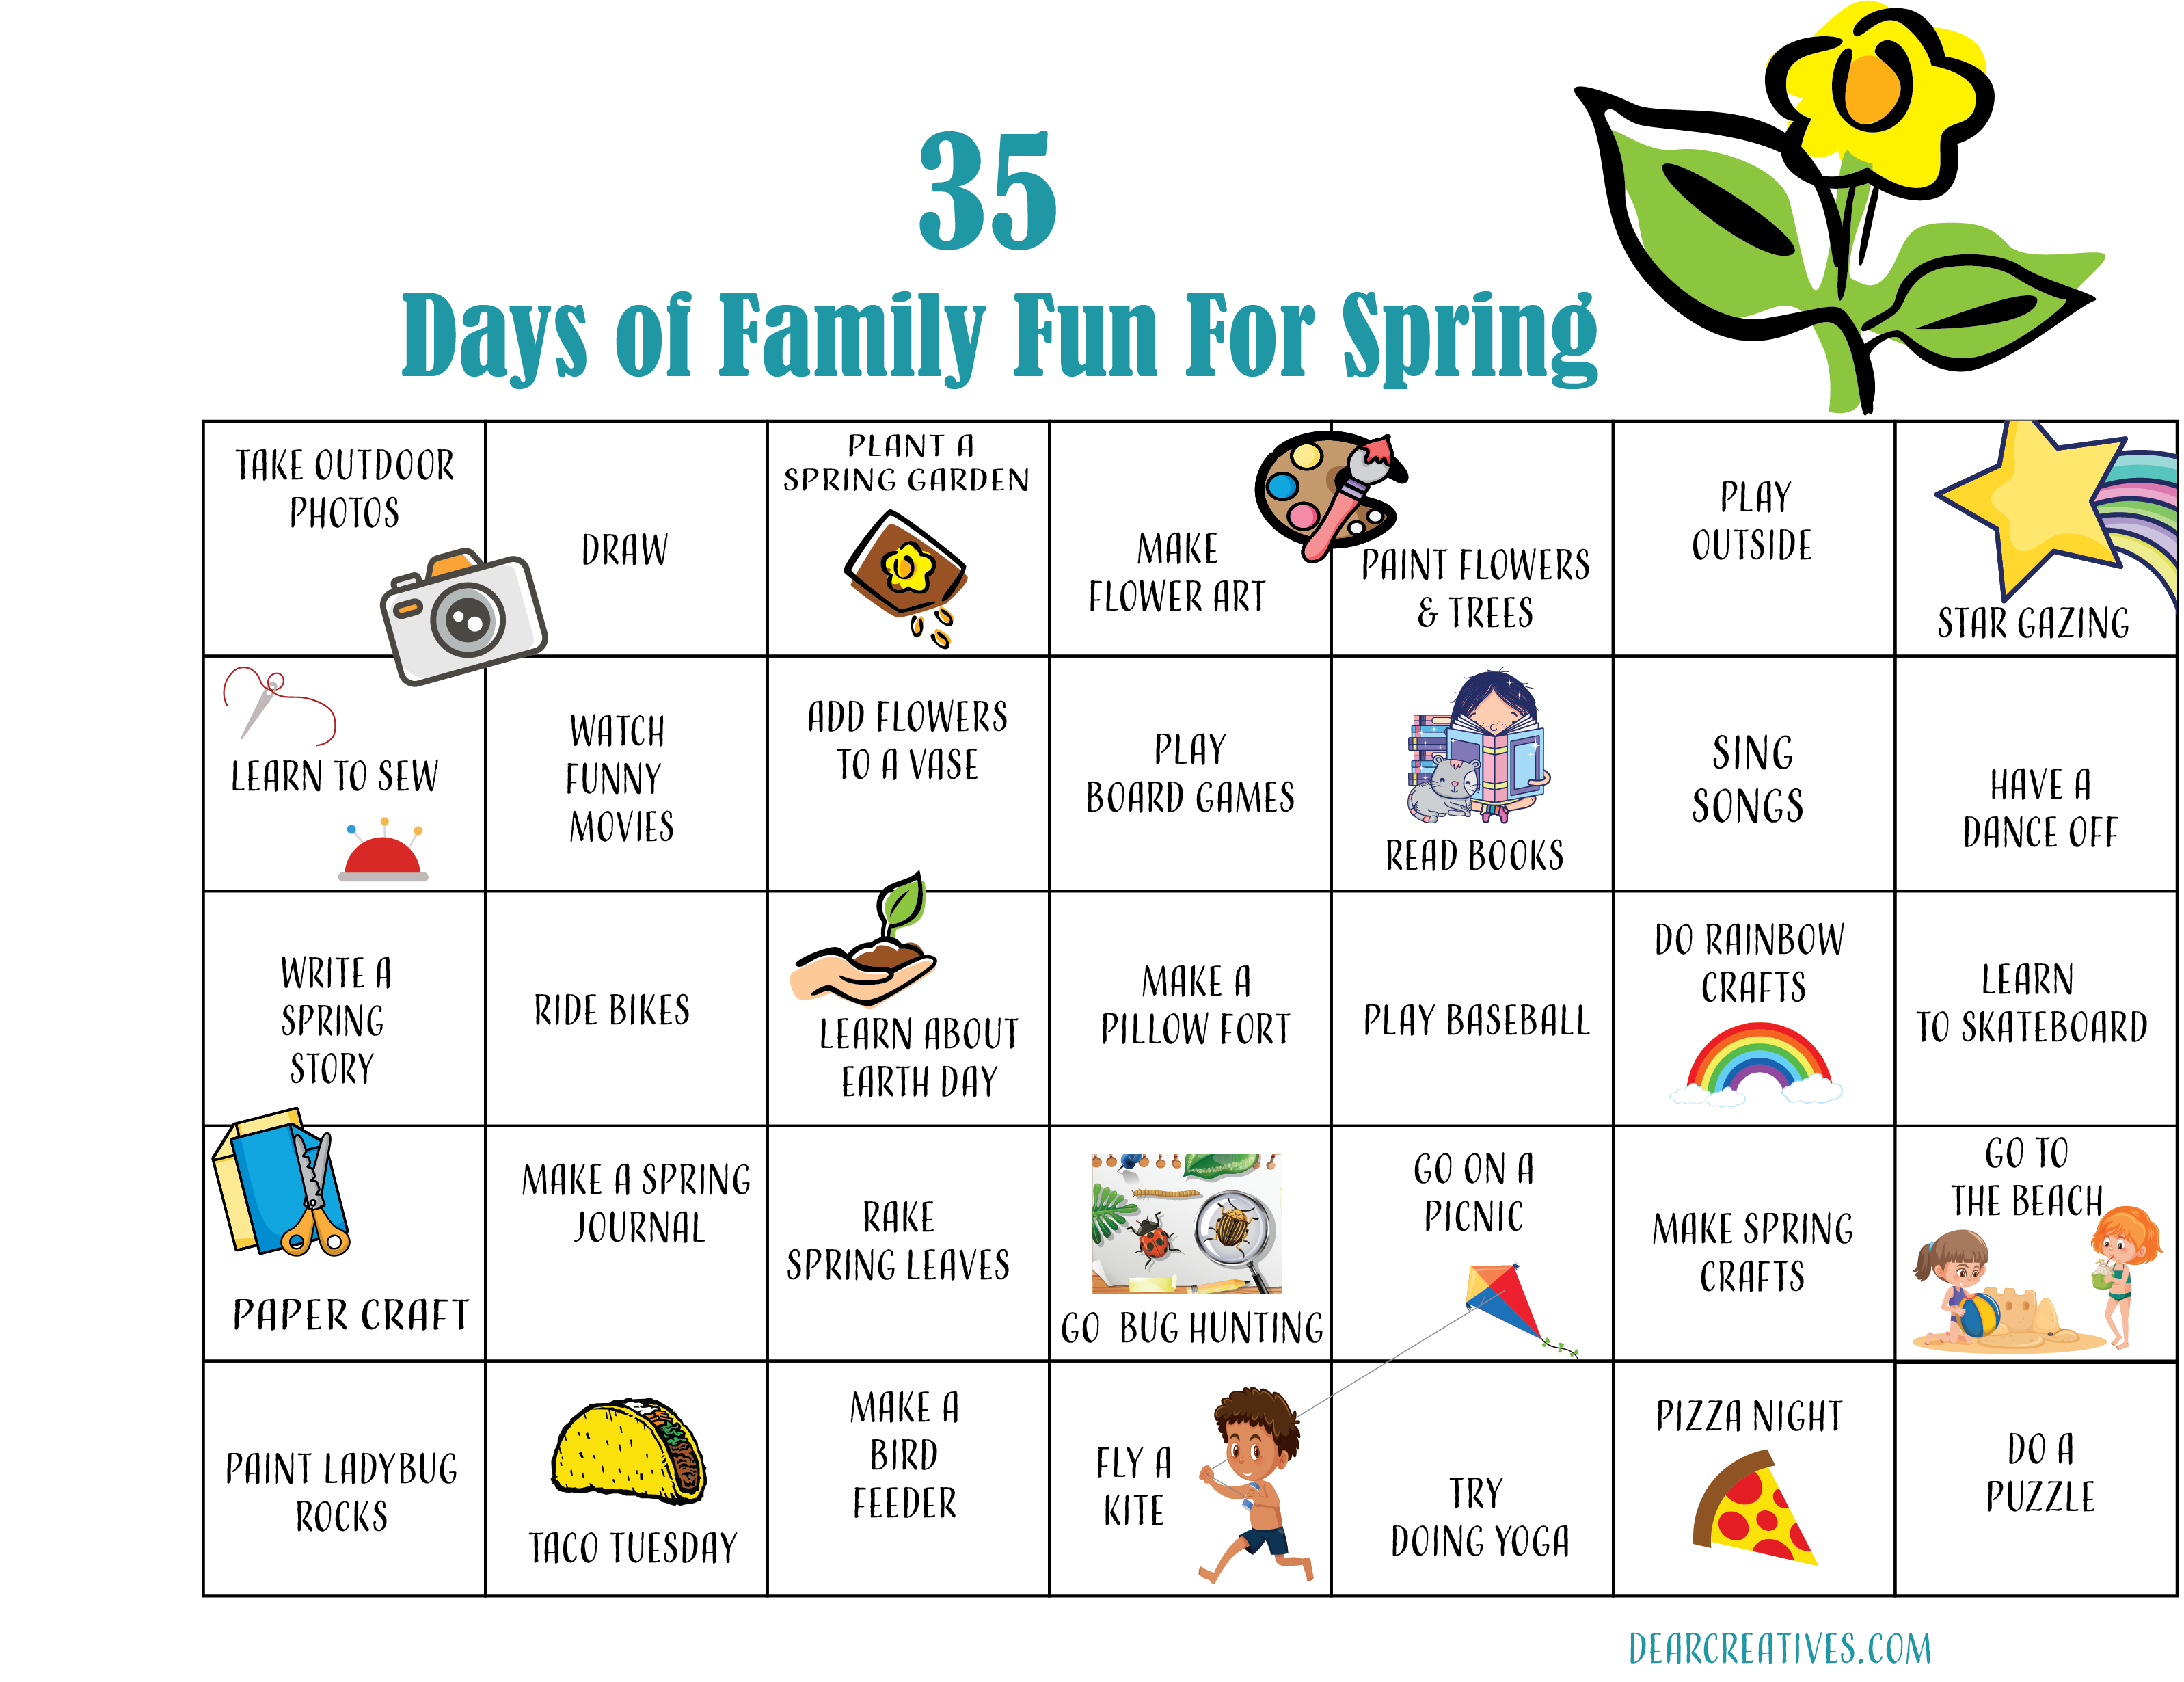 Spring Activity Calendar-A bucket list of spring activities. Fun stuff for the whole family to do in the spring. DearCreatives.com